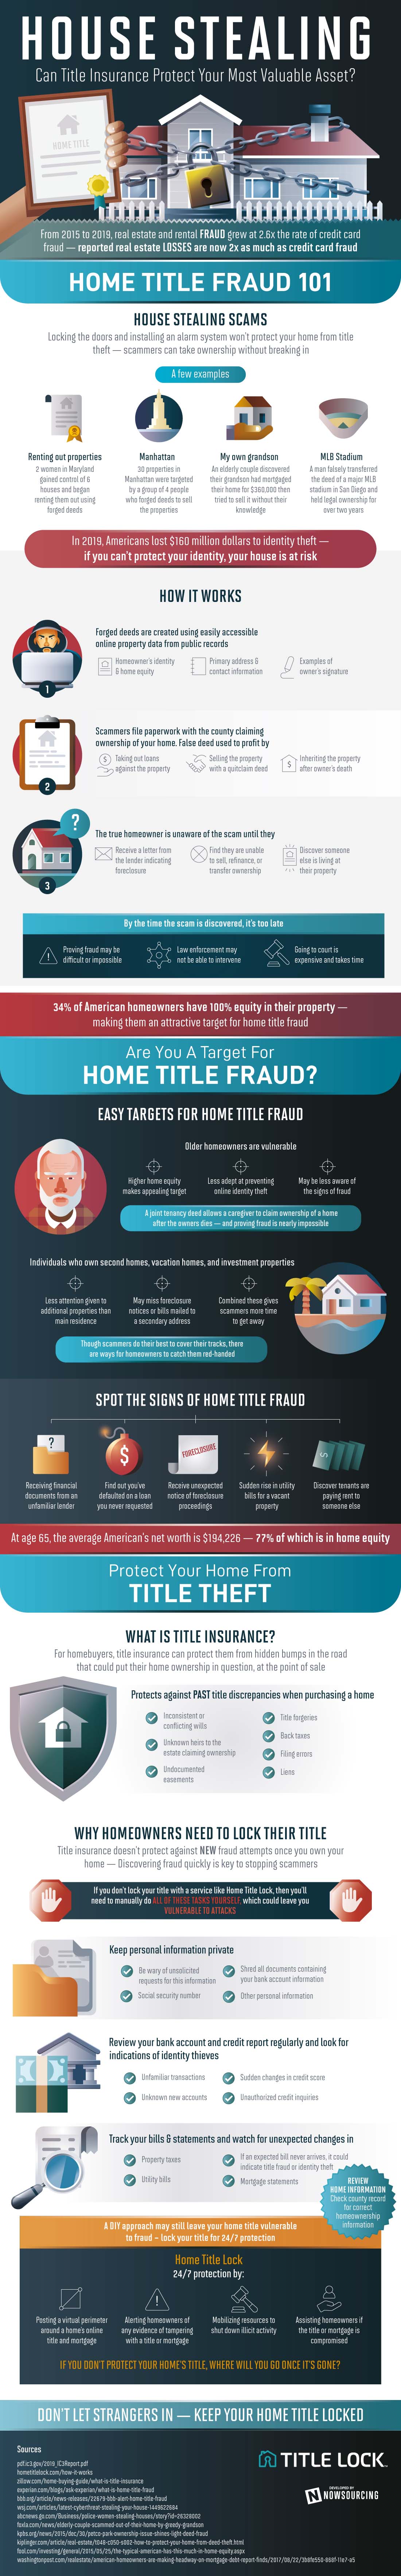 Home Title Fraud: What You Should Know